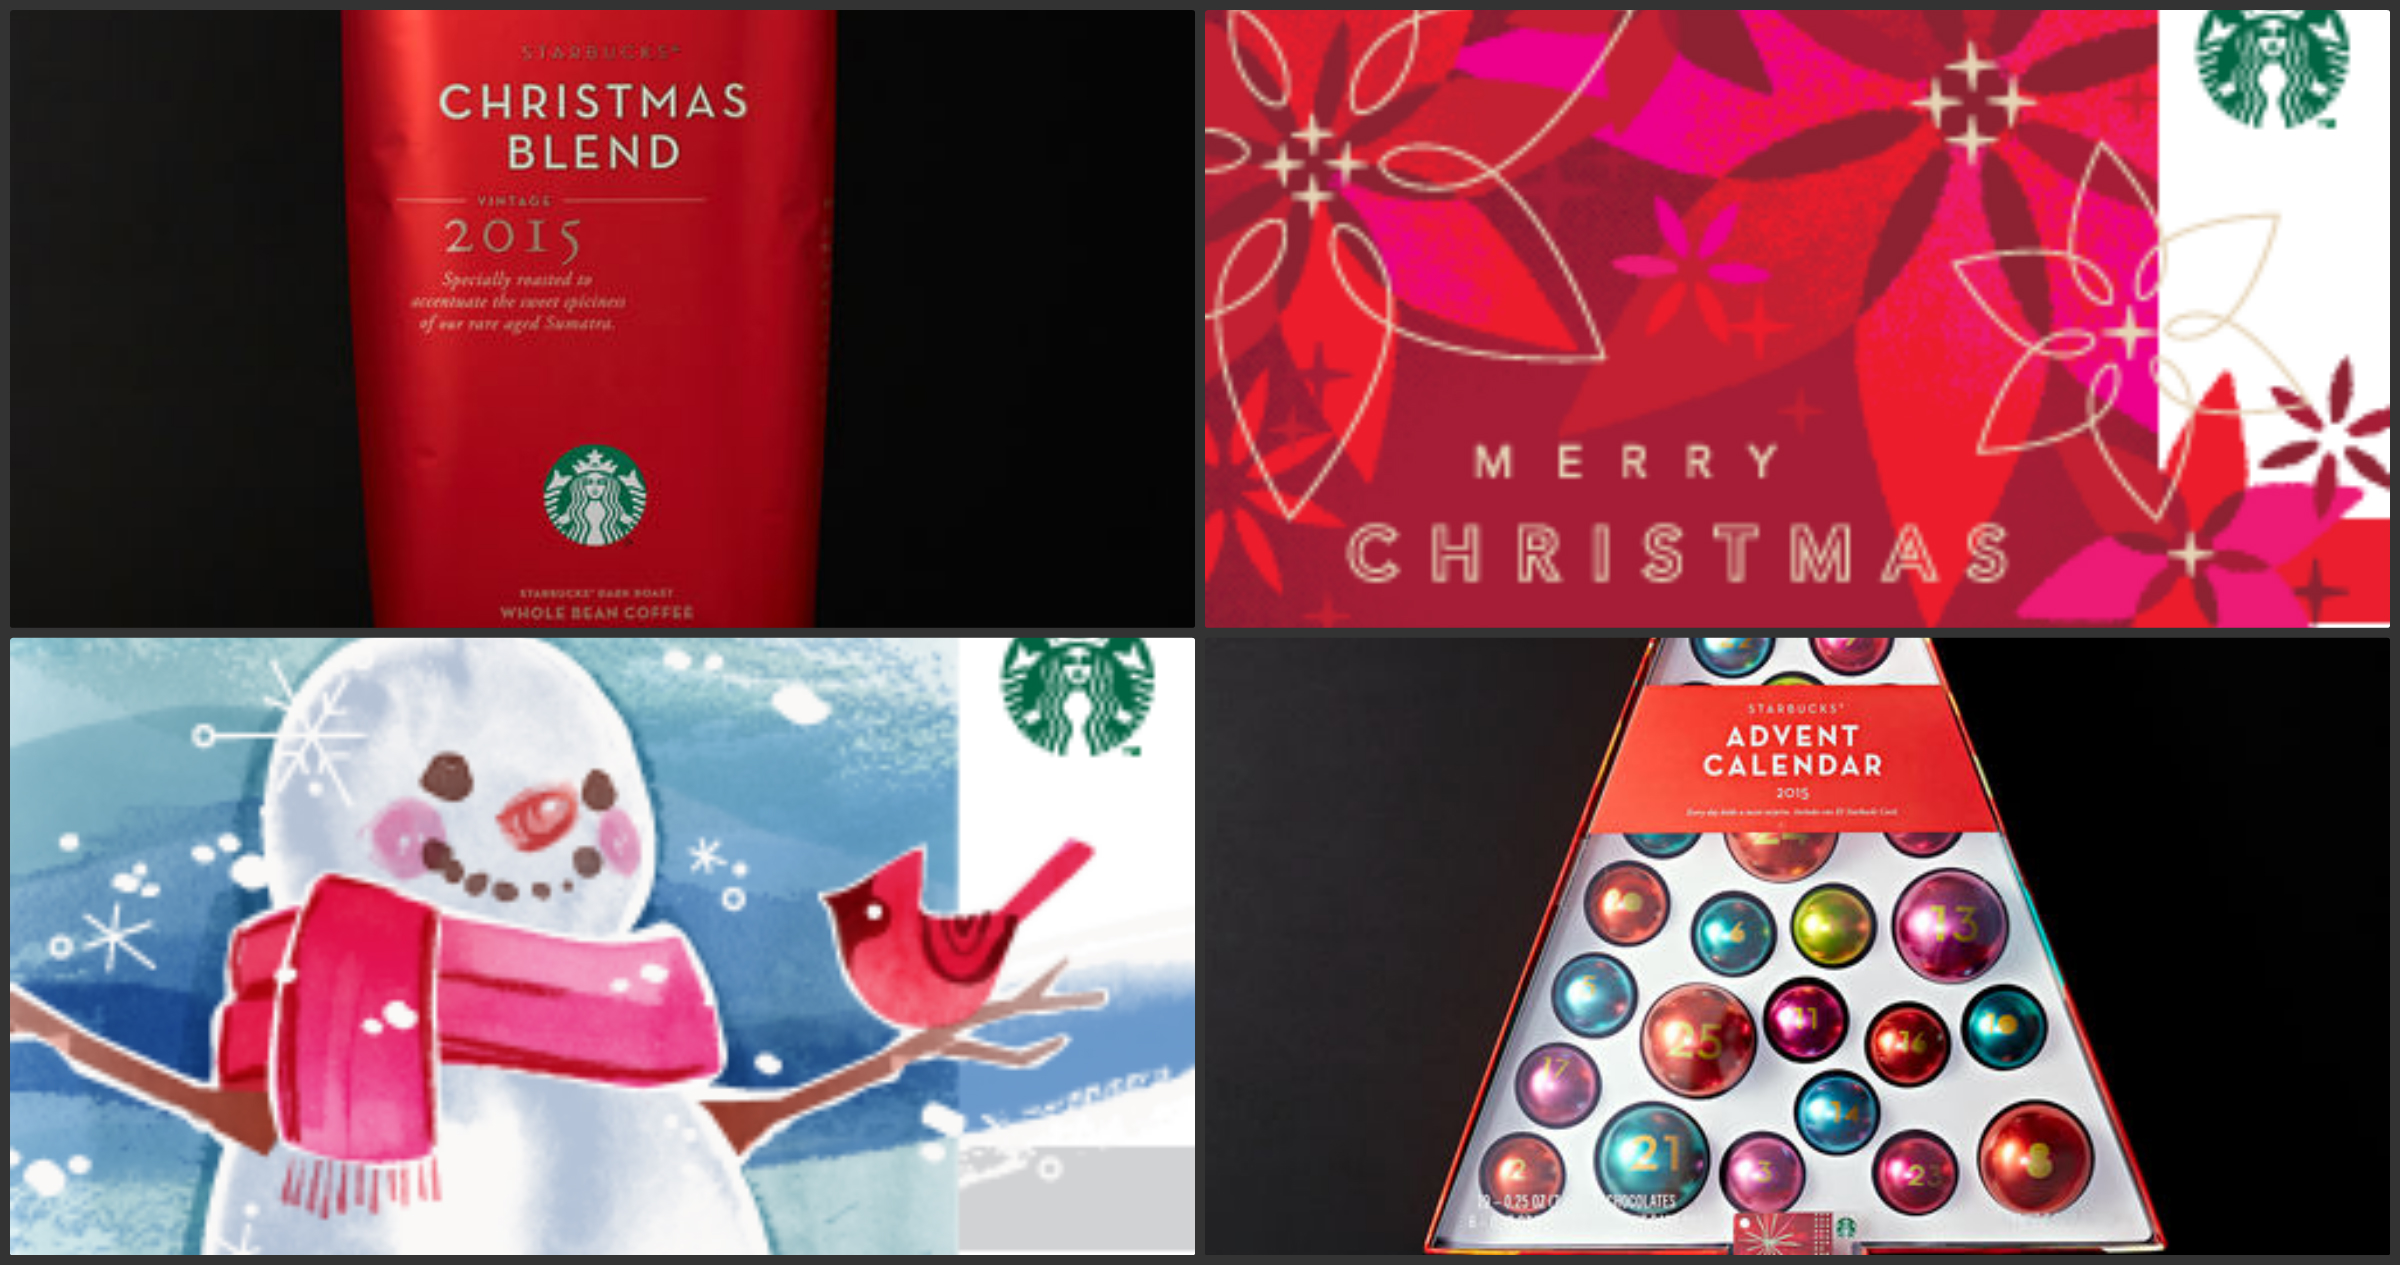 The holiday cups are here and there's nothing I can get offended over and  that makes me sad, which is actually kind of offensive. Well played,  Starbucks. : r/starbucks